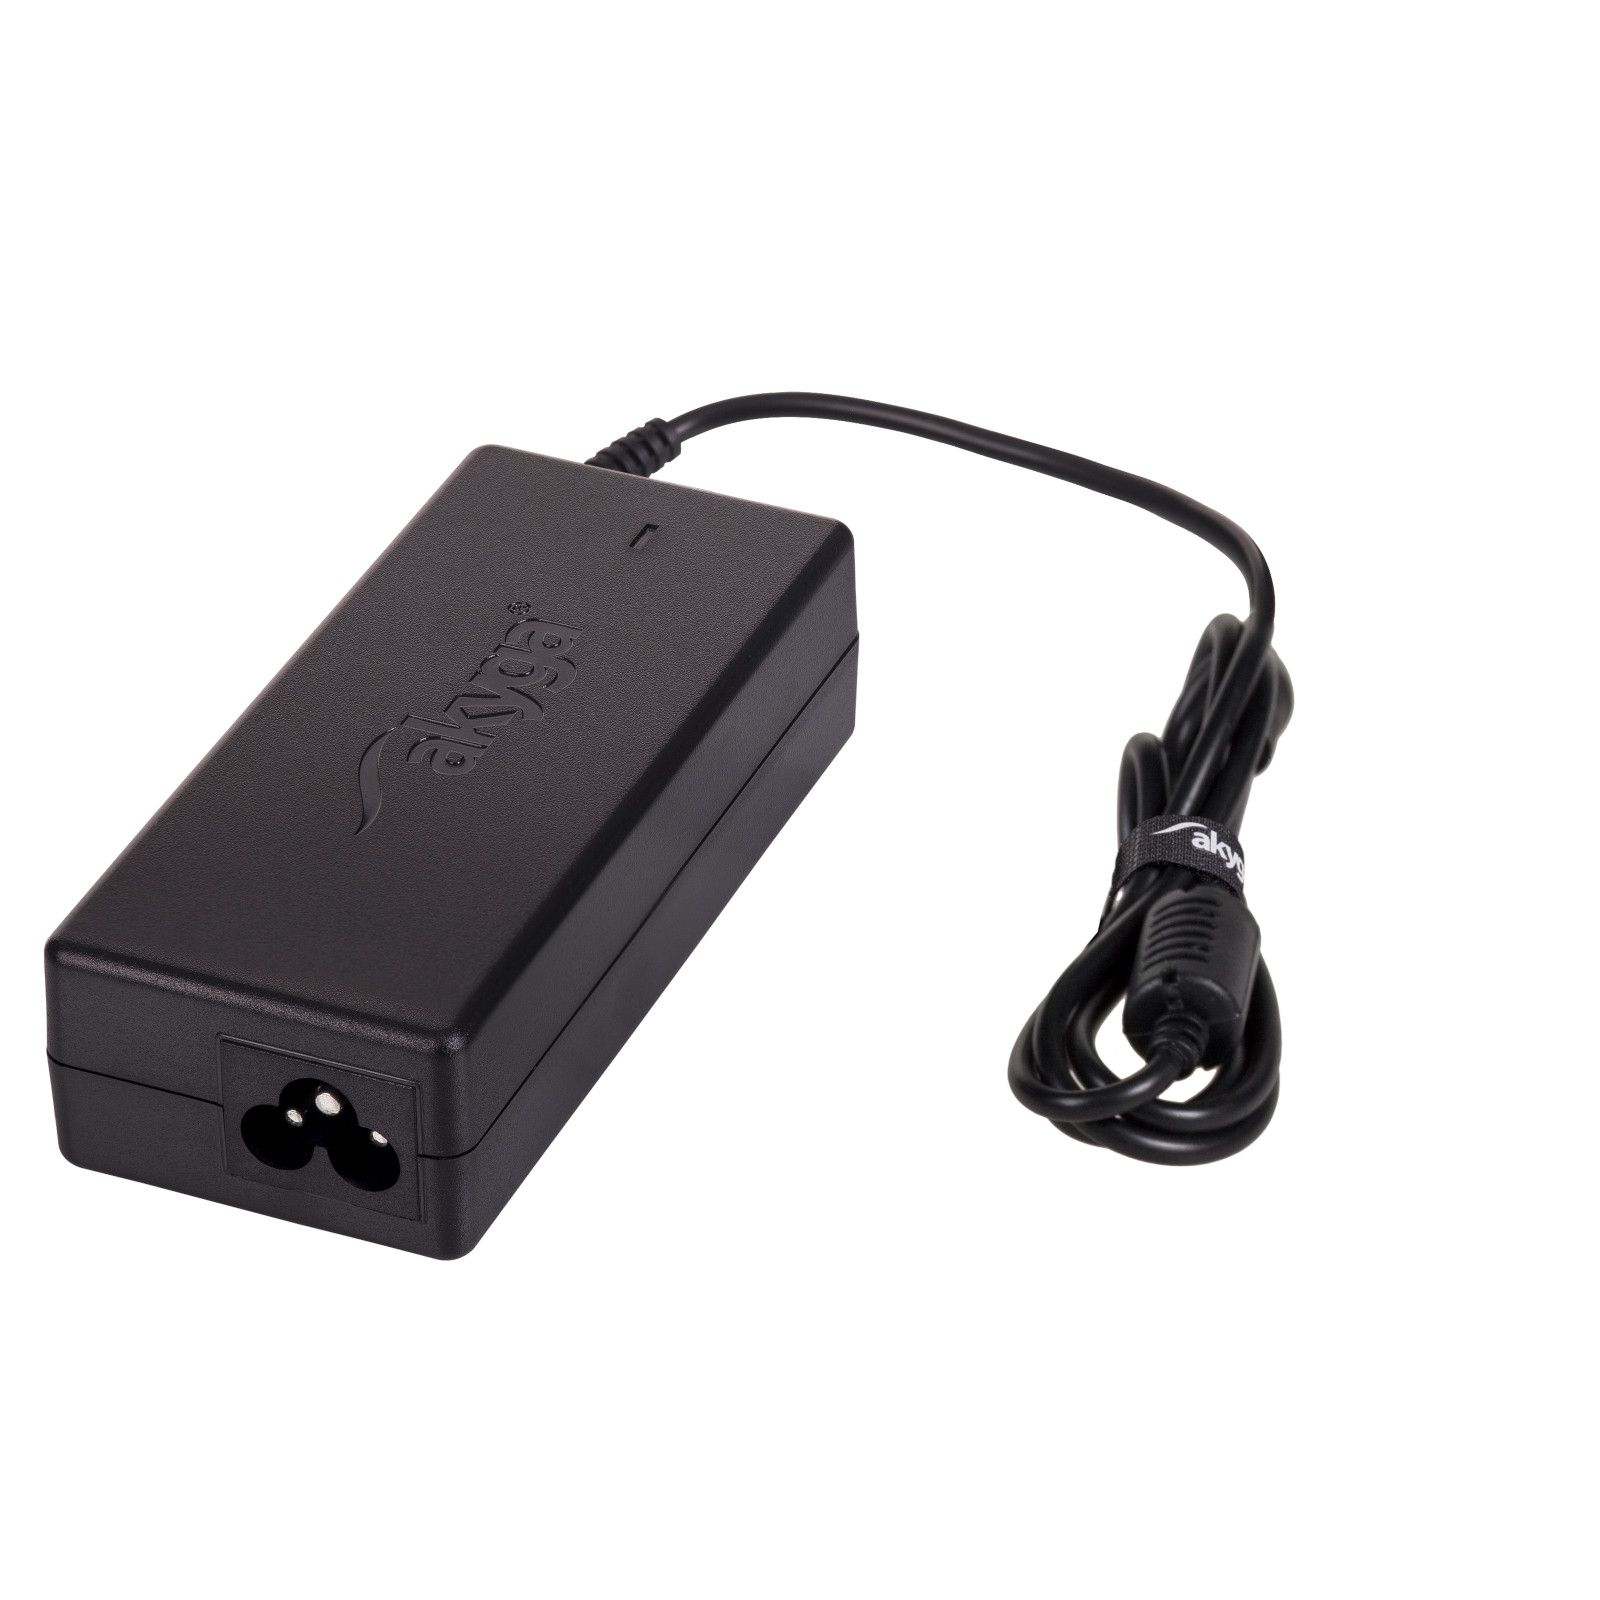 Akyga notebook power adapter AK-ND-08 19V/4.74A 90W 4.8x1.7 mm HP power adapter/inverter Indoor Black_4